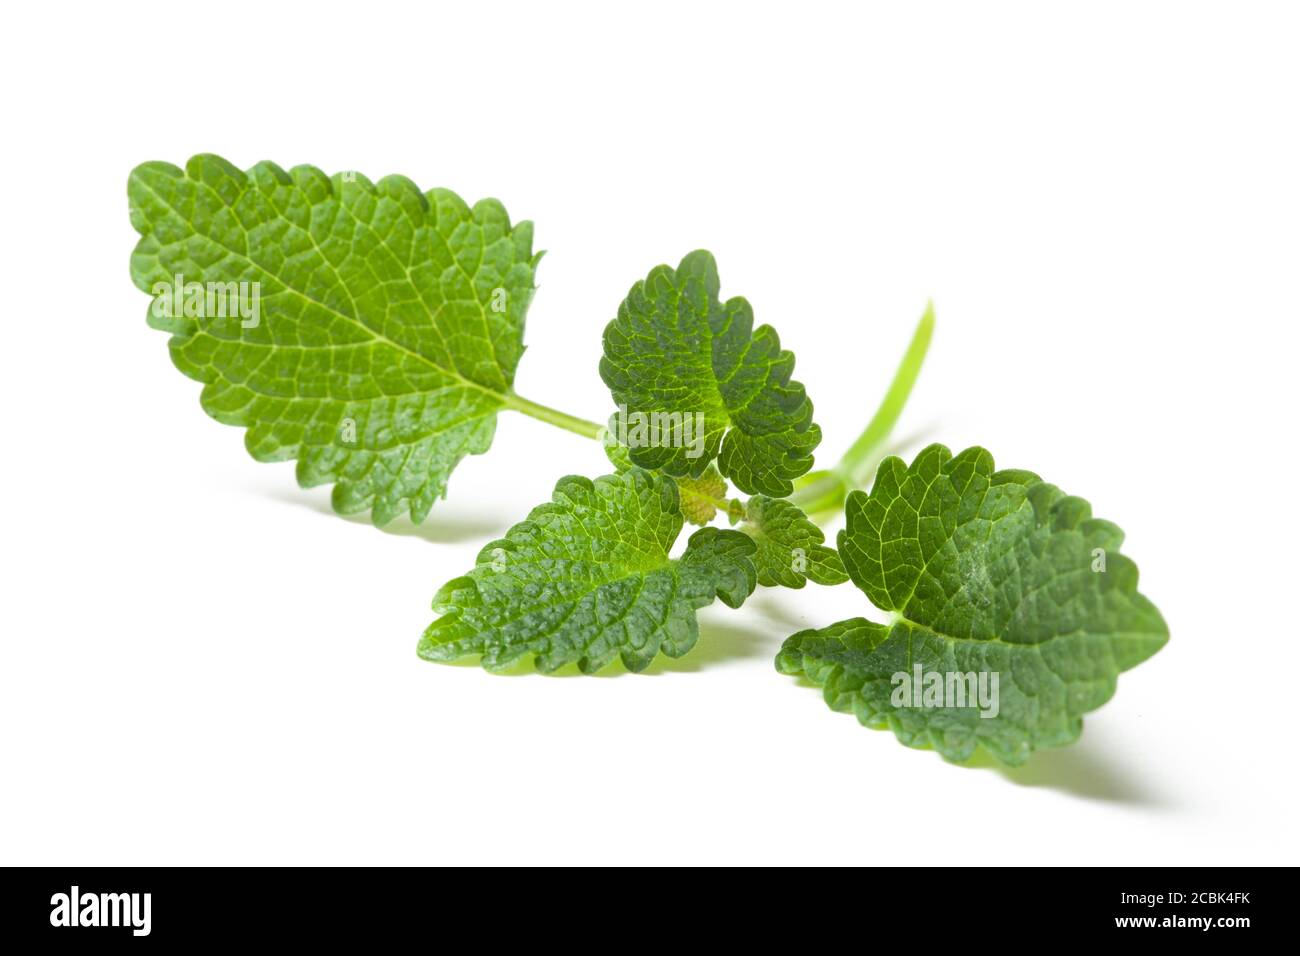 Twig of fresh mint green leaves isolated on white background Stock Photo